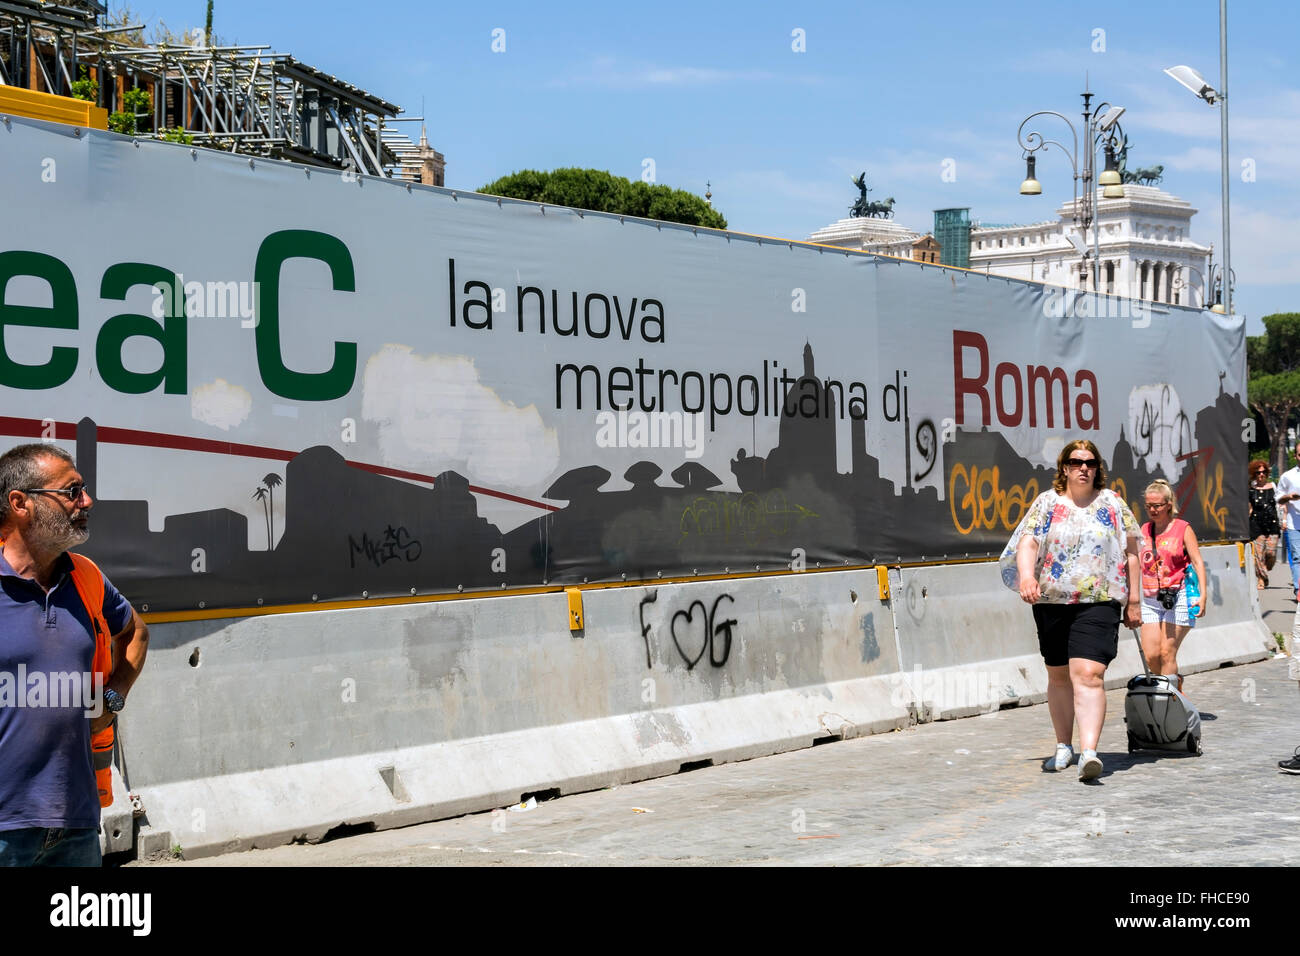 The new, third metro / subway line in Rome requires massive works to protect the historic centre around the Forum and Colosseum. Stock Photo